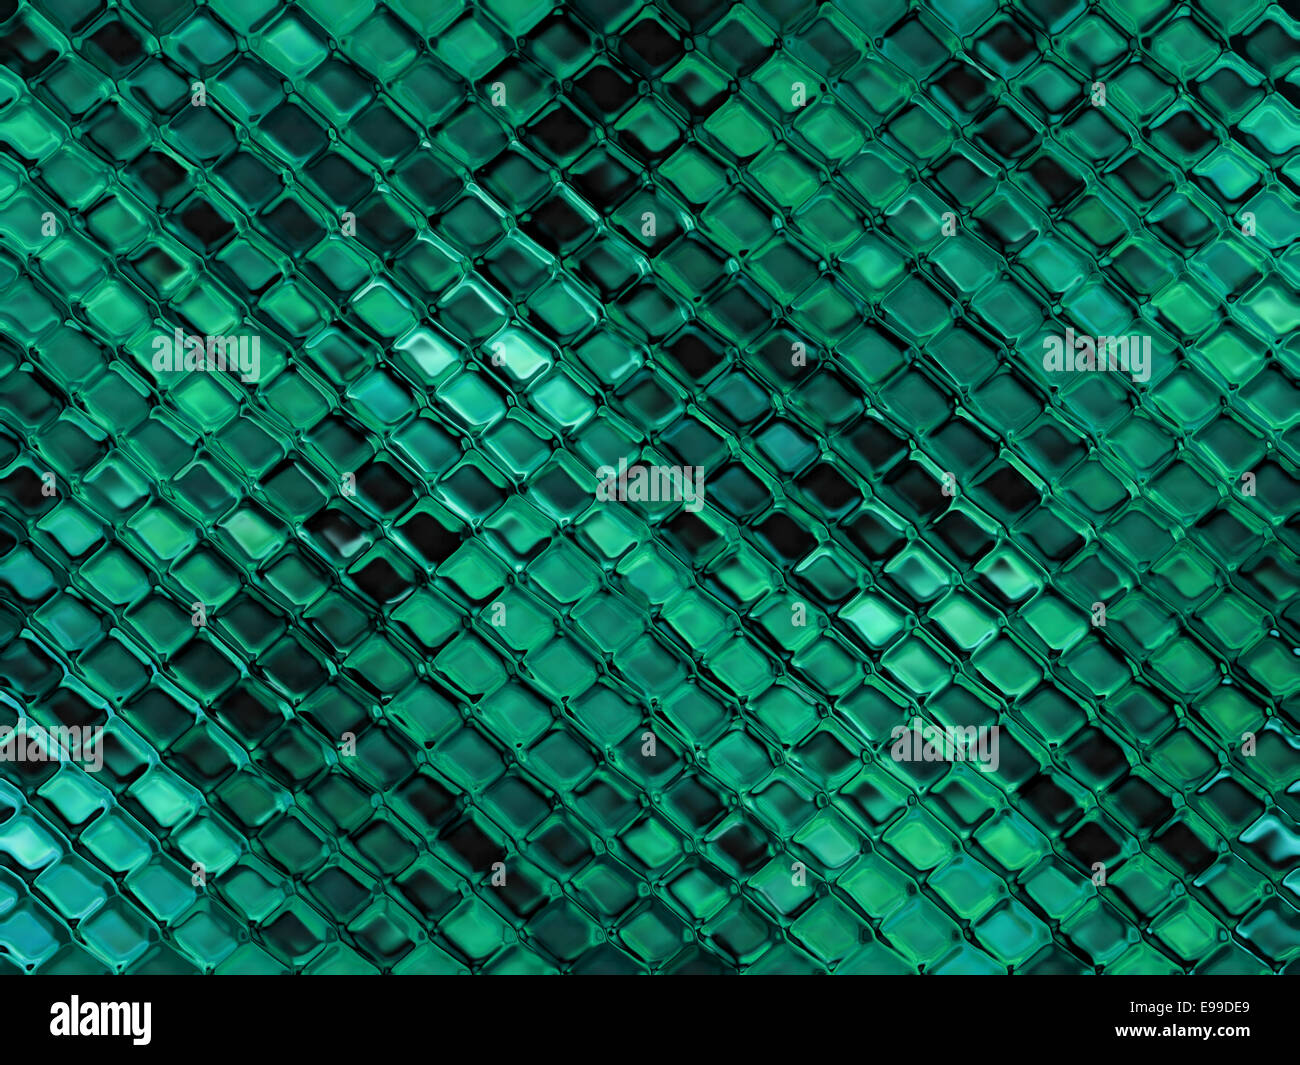 Abstract frosted or mat glass industrial texture Stock Photo